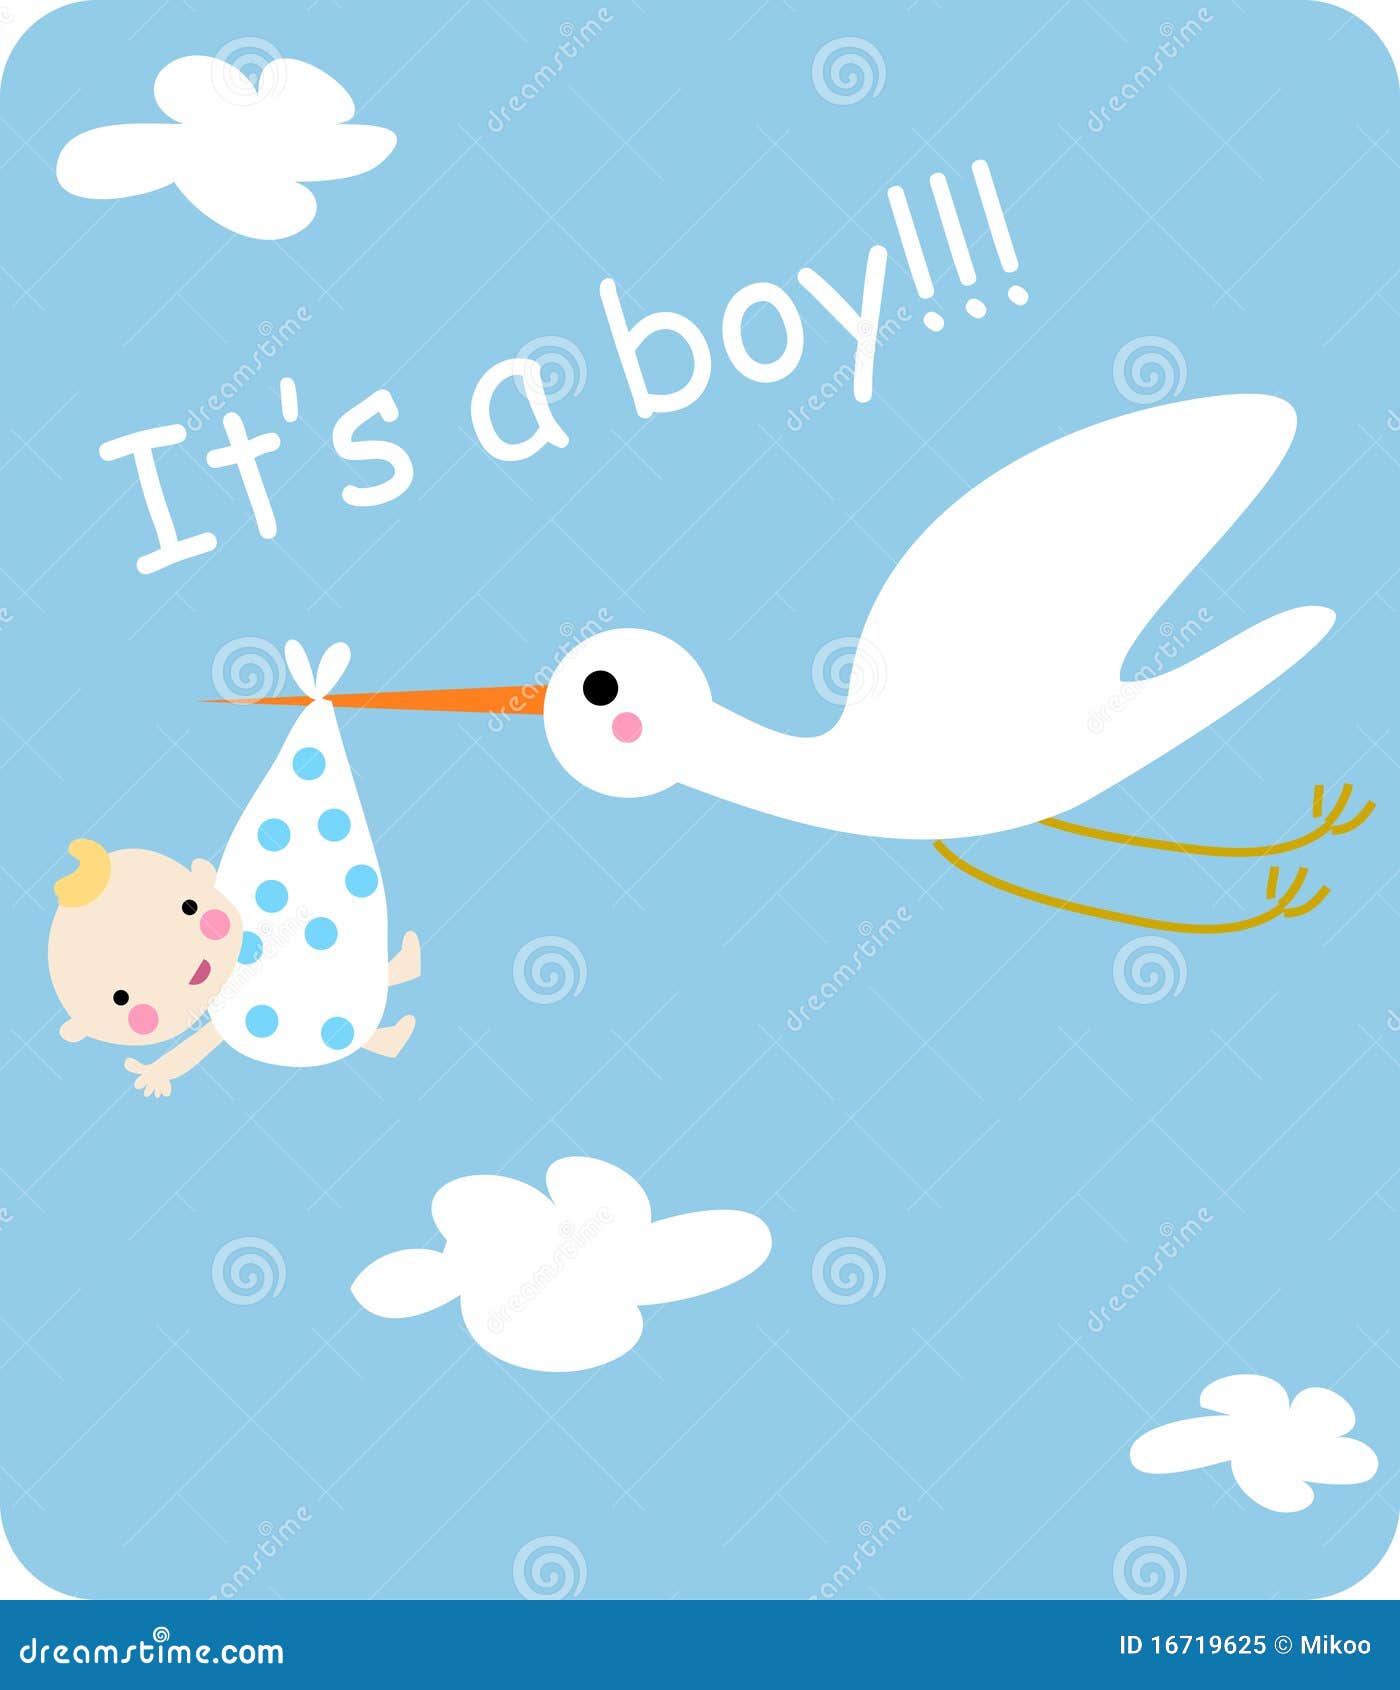 free clipart stork with baby boy - photo #39